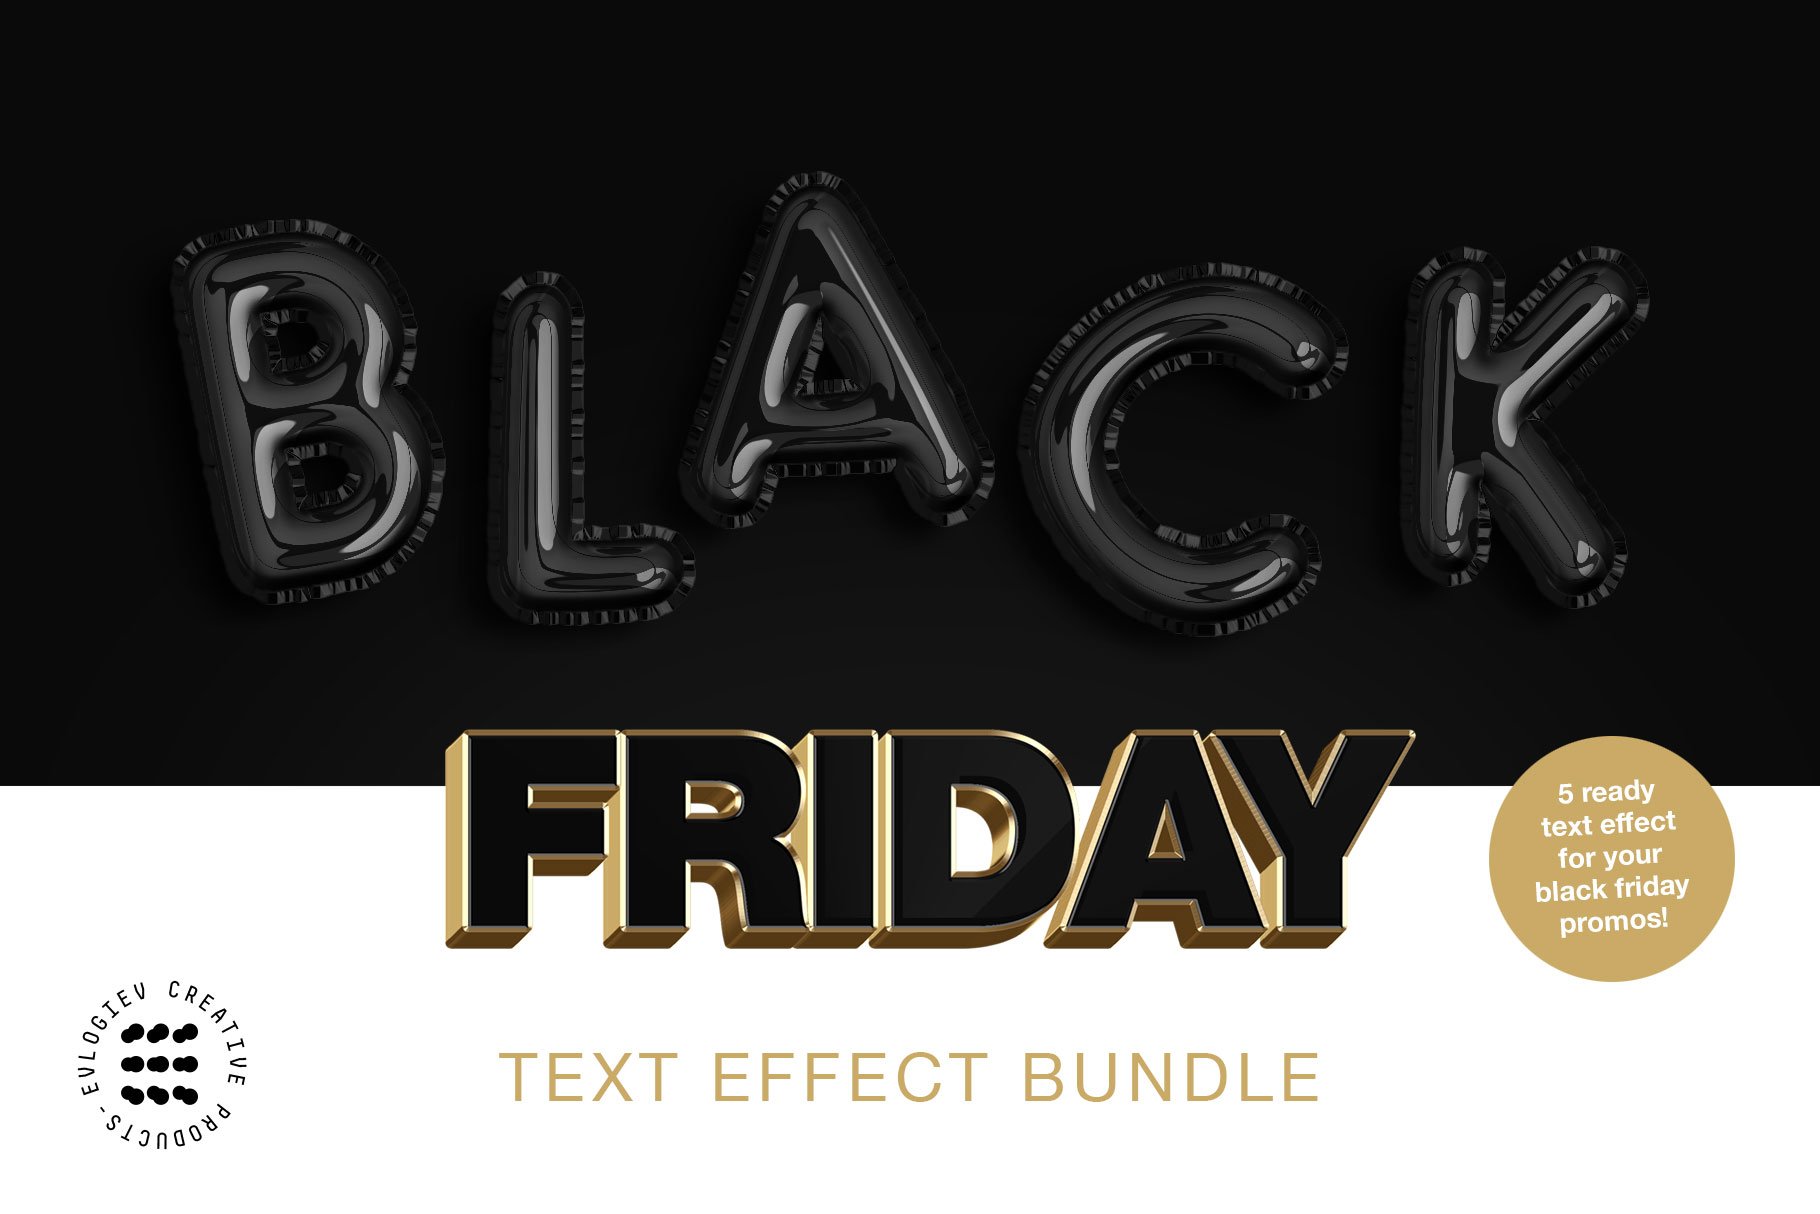 Black Friday Text Effect Bundlecover image.